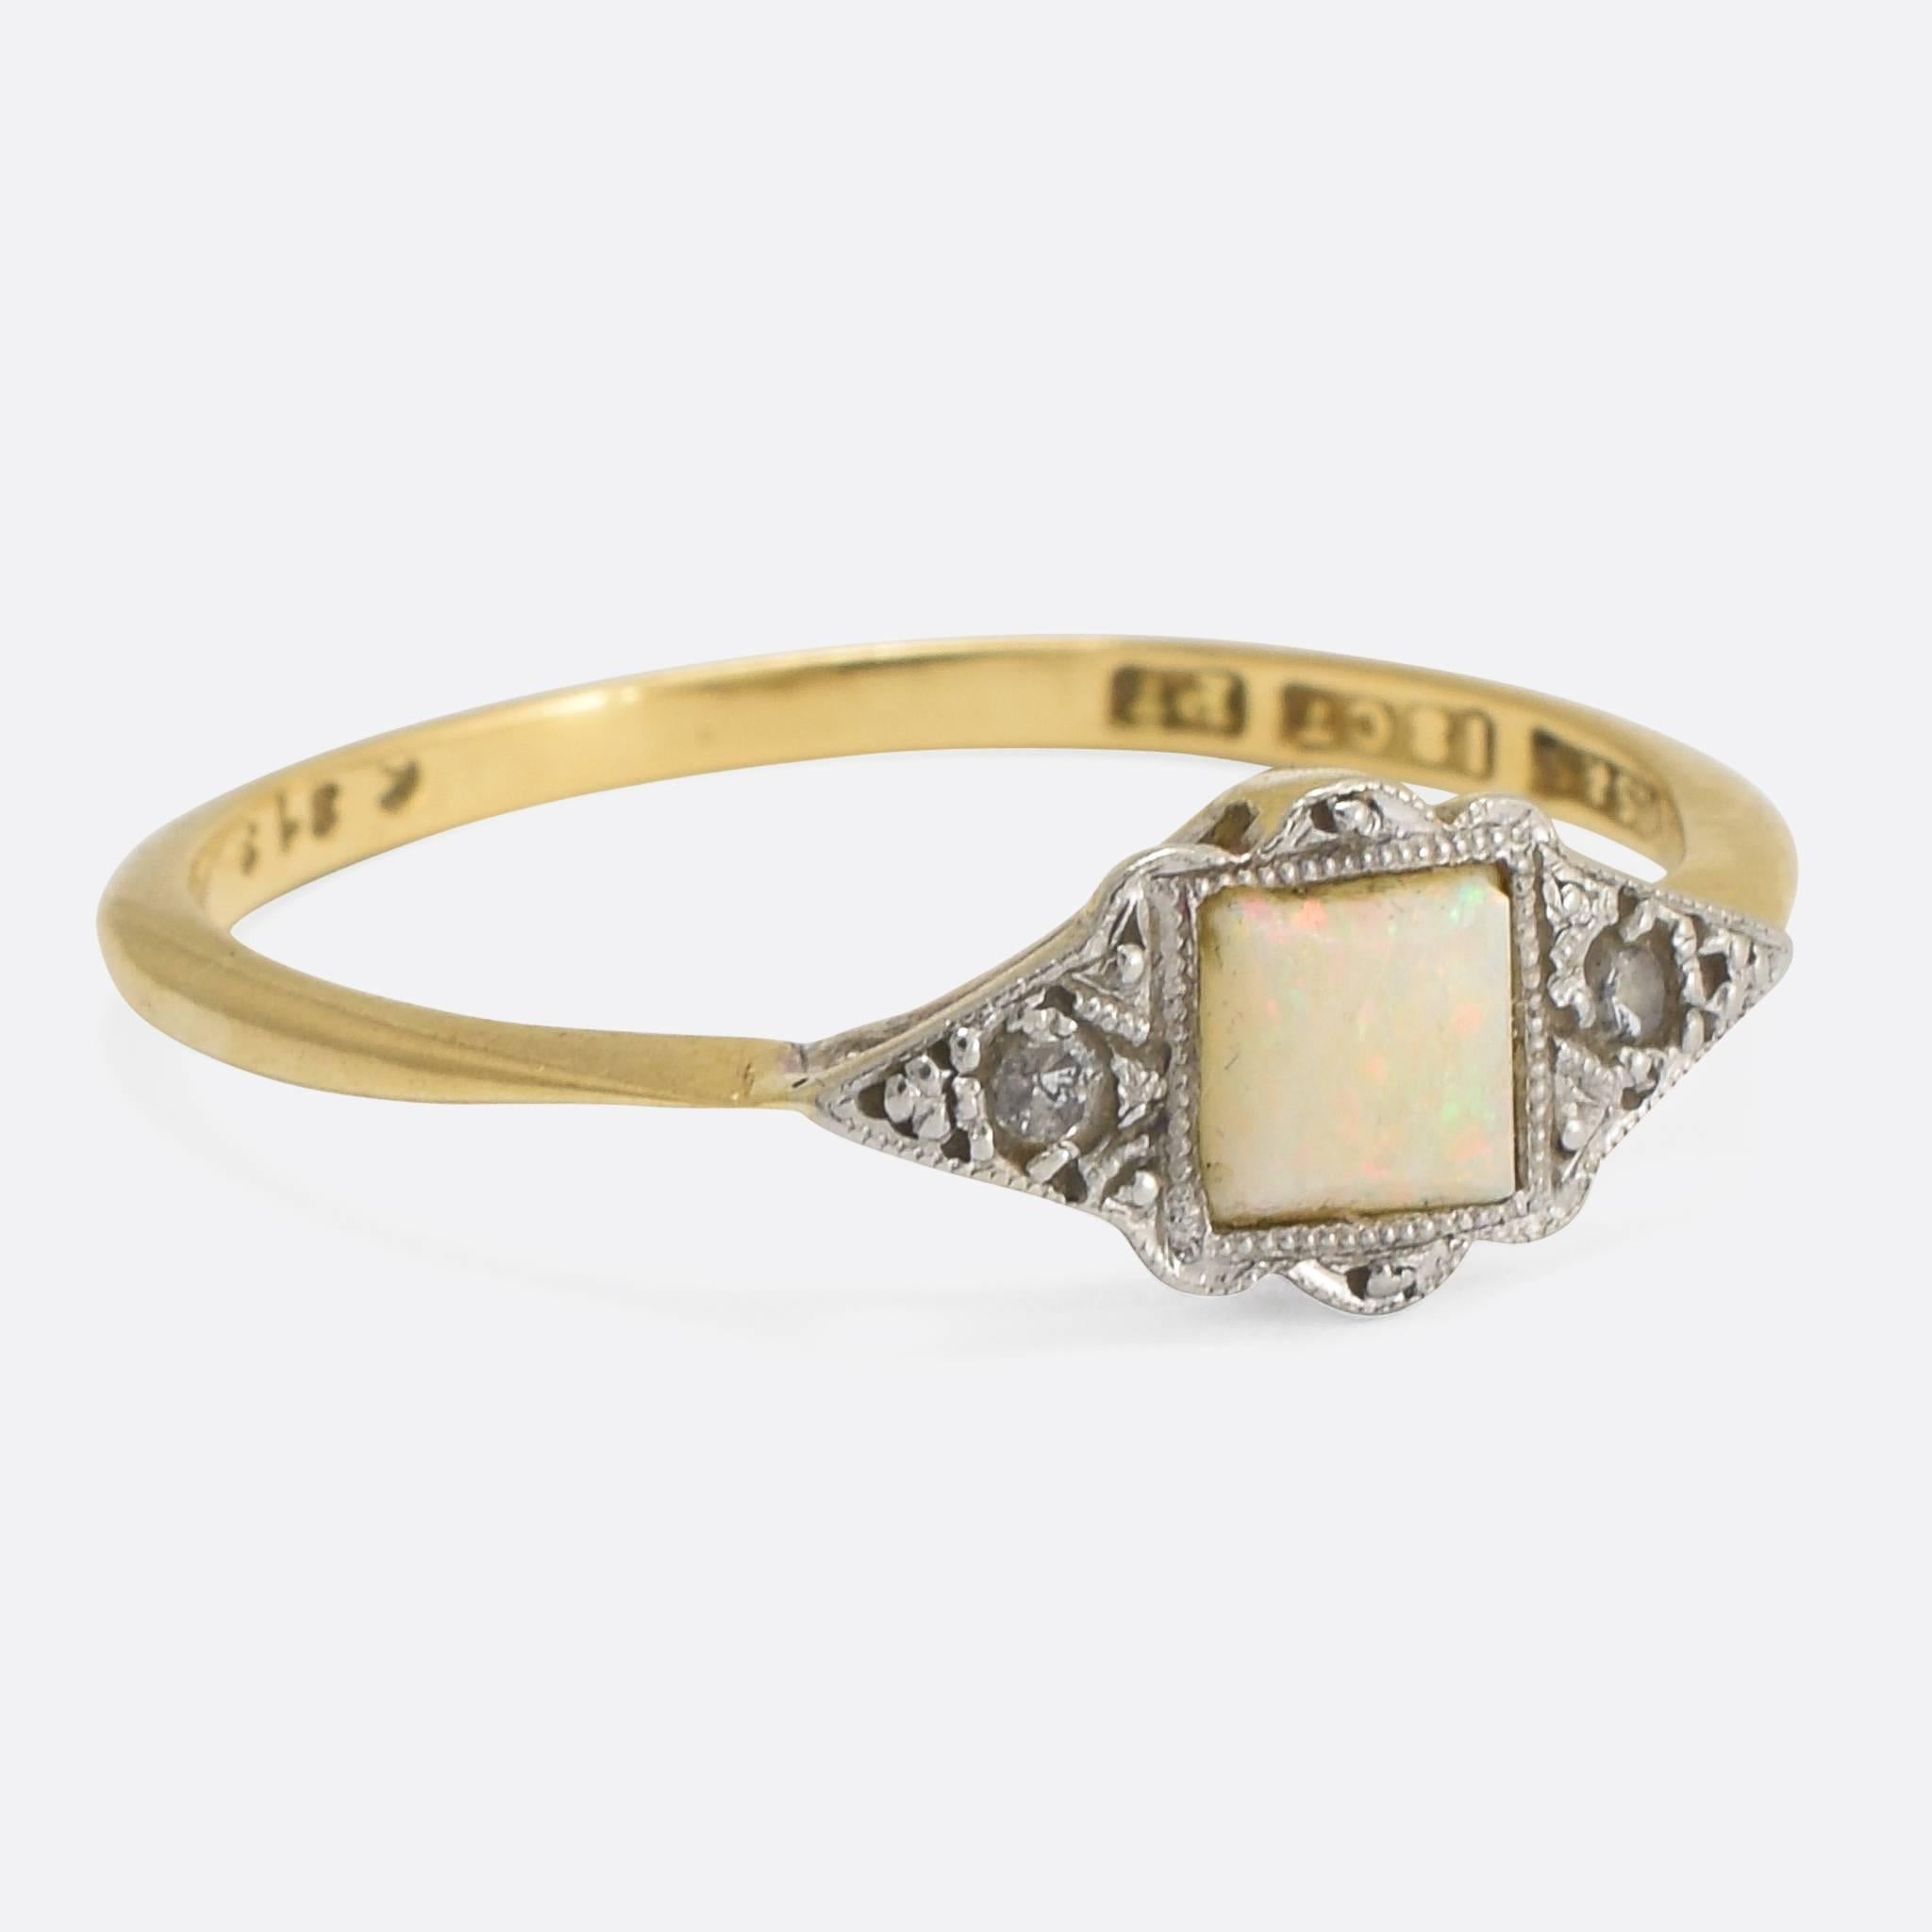 A classic Art Deco era small-scale cocktail ring, set with a square opal cabochon and two single cut diamonds. The head is modelled in platinum, with fine millegrain patternation and elegant pinched shoulders. The band is modelled in 18k yellow